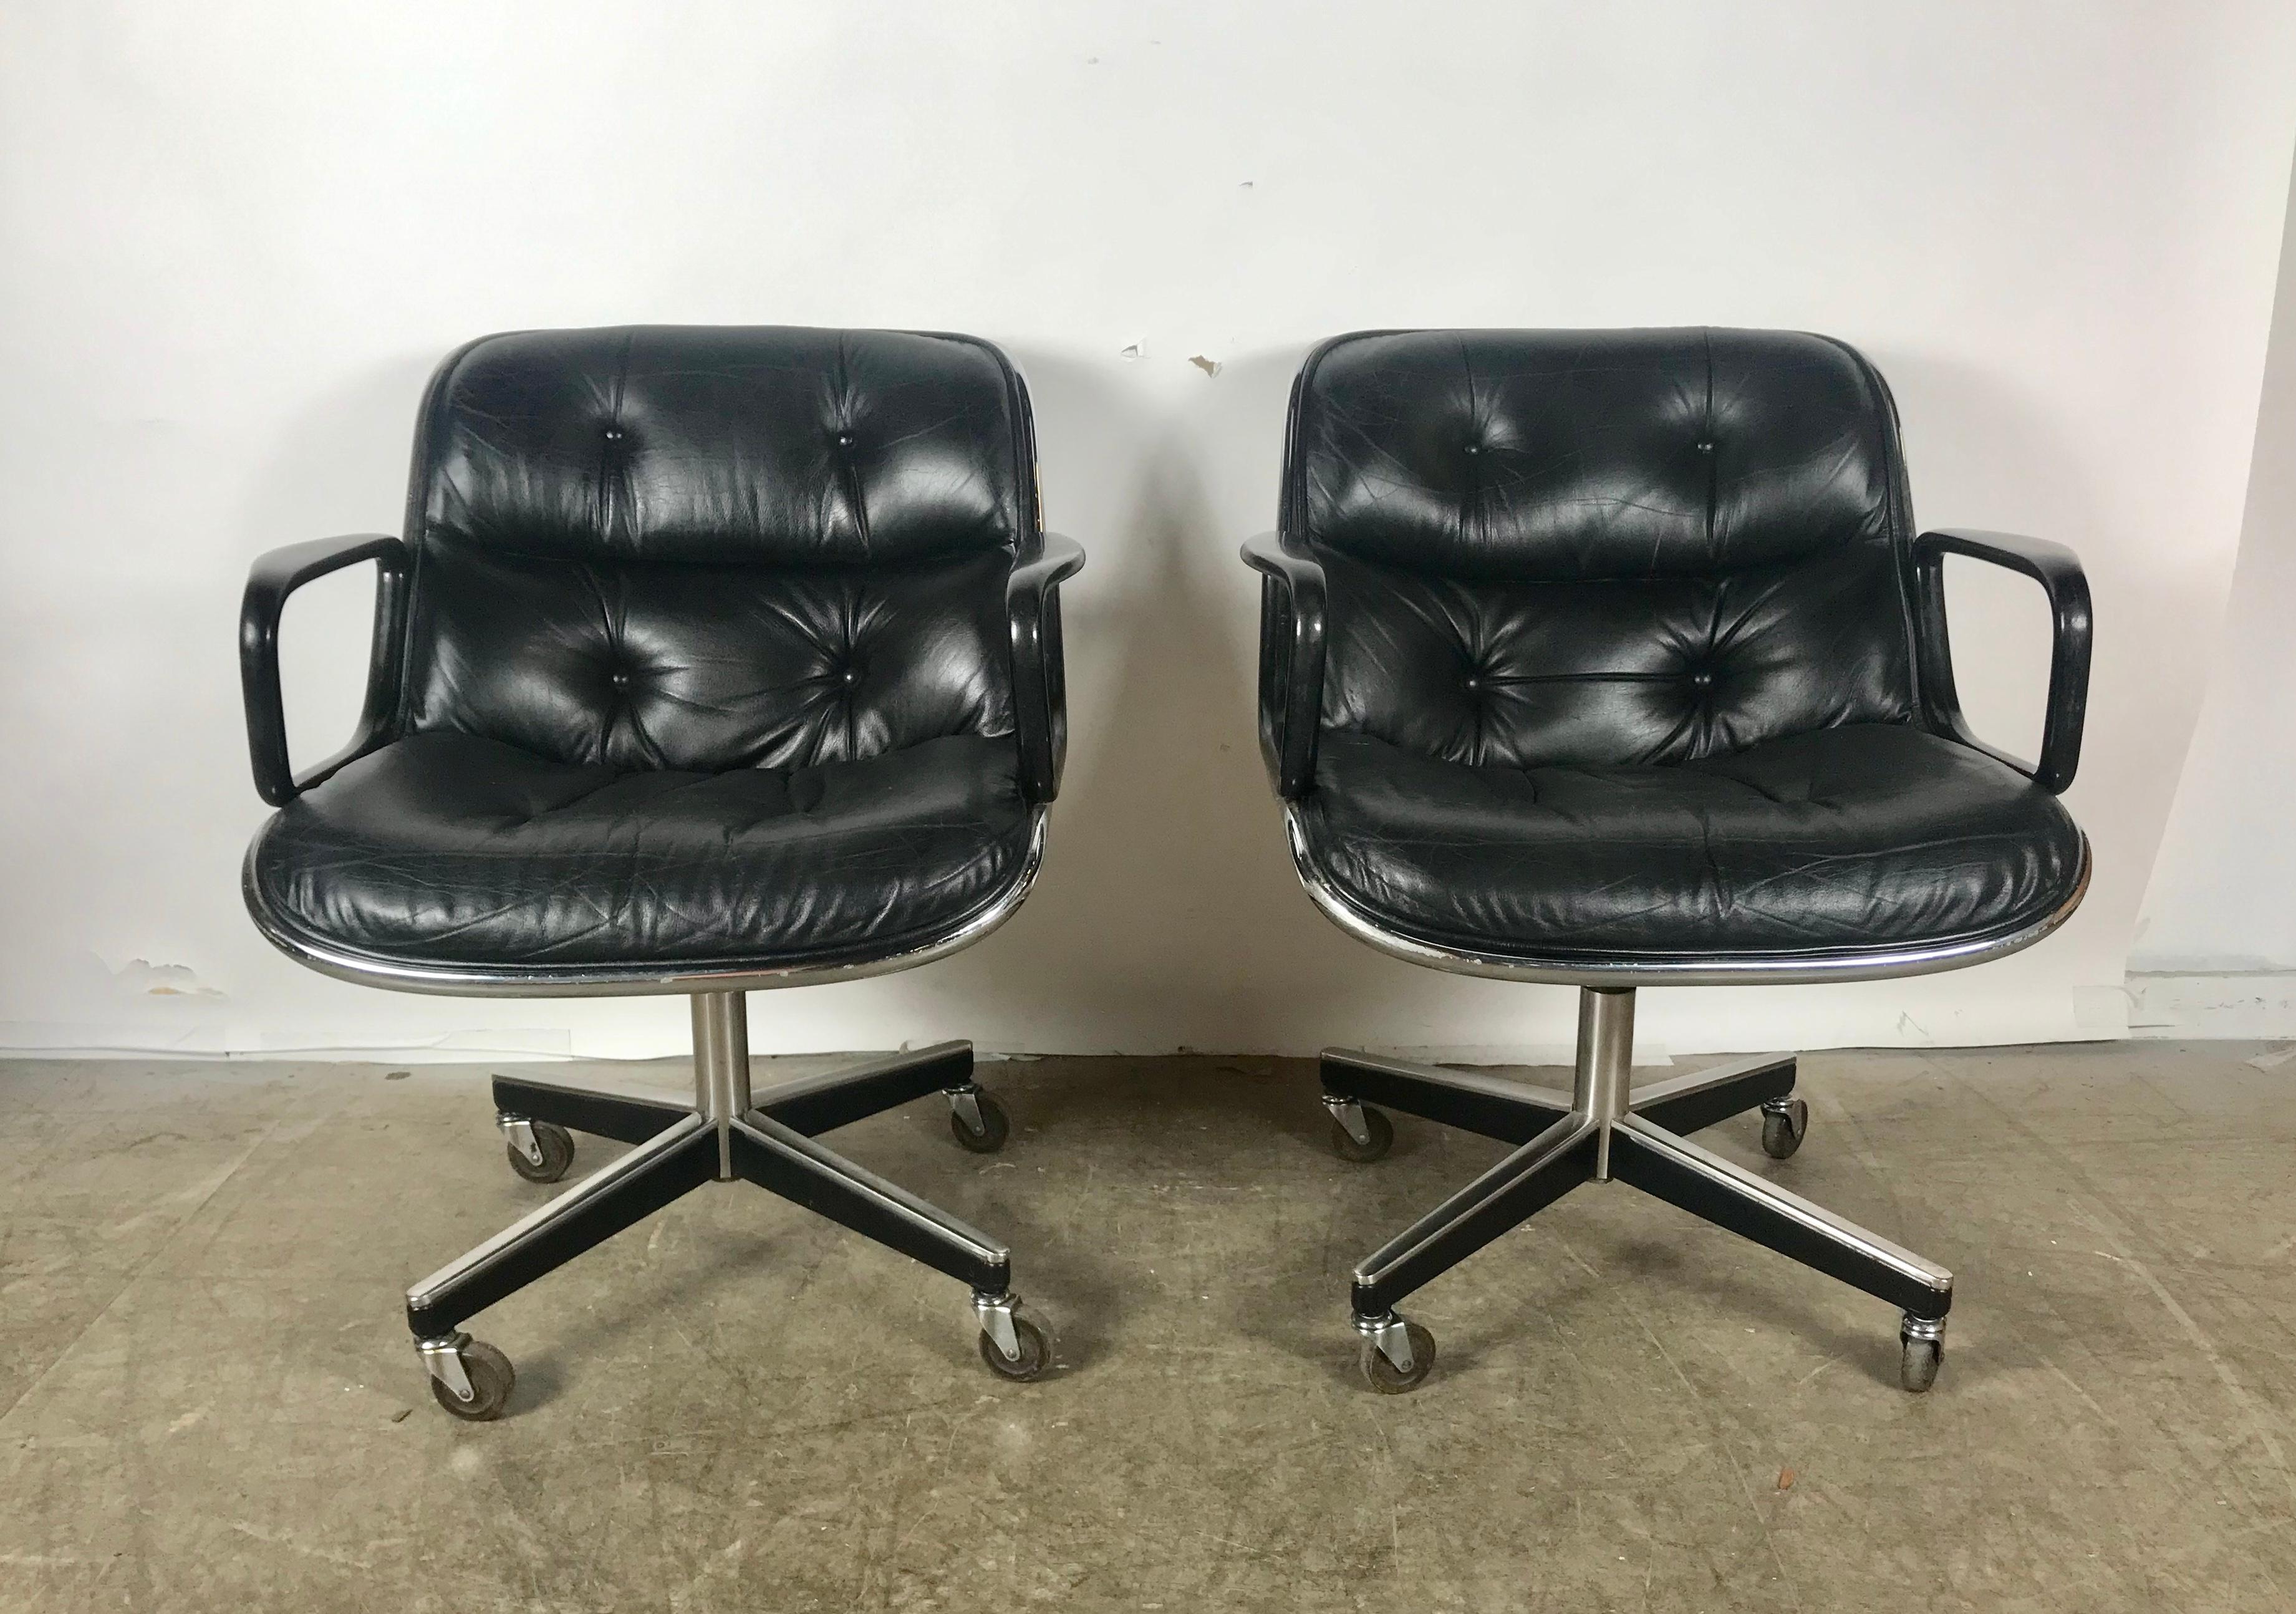 Pair of Charles Pollock Executive armchairs in leather for Knoll International. Tilt, swivel and castors. Nice original vintage condition, minor scratches to back side. Retain original Knoll labels.

Charles Pollock 

Charles Pollock worked in